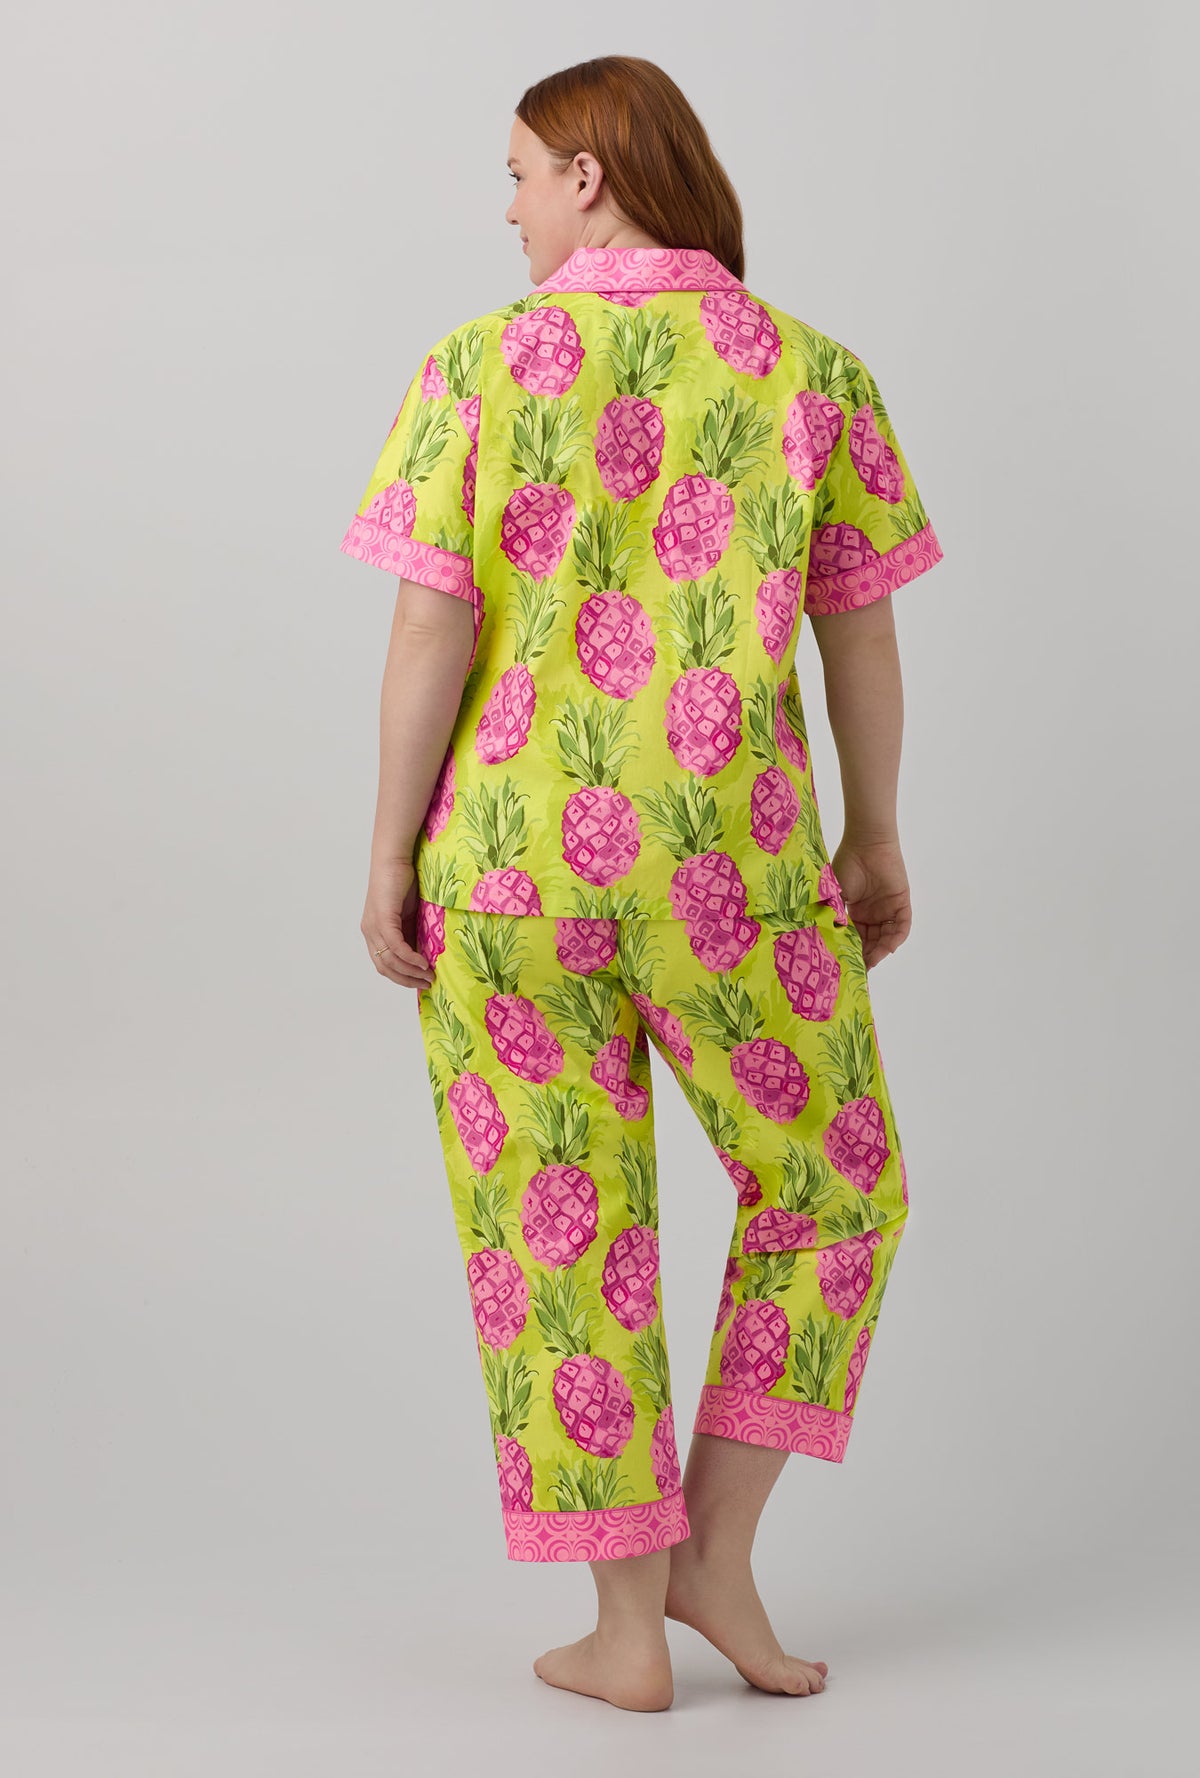 A lady wearing short sleeve classic cropped pj set with kiwi pineapple print